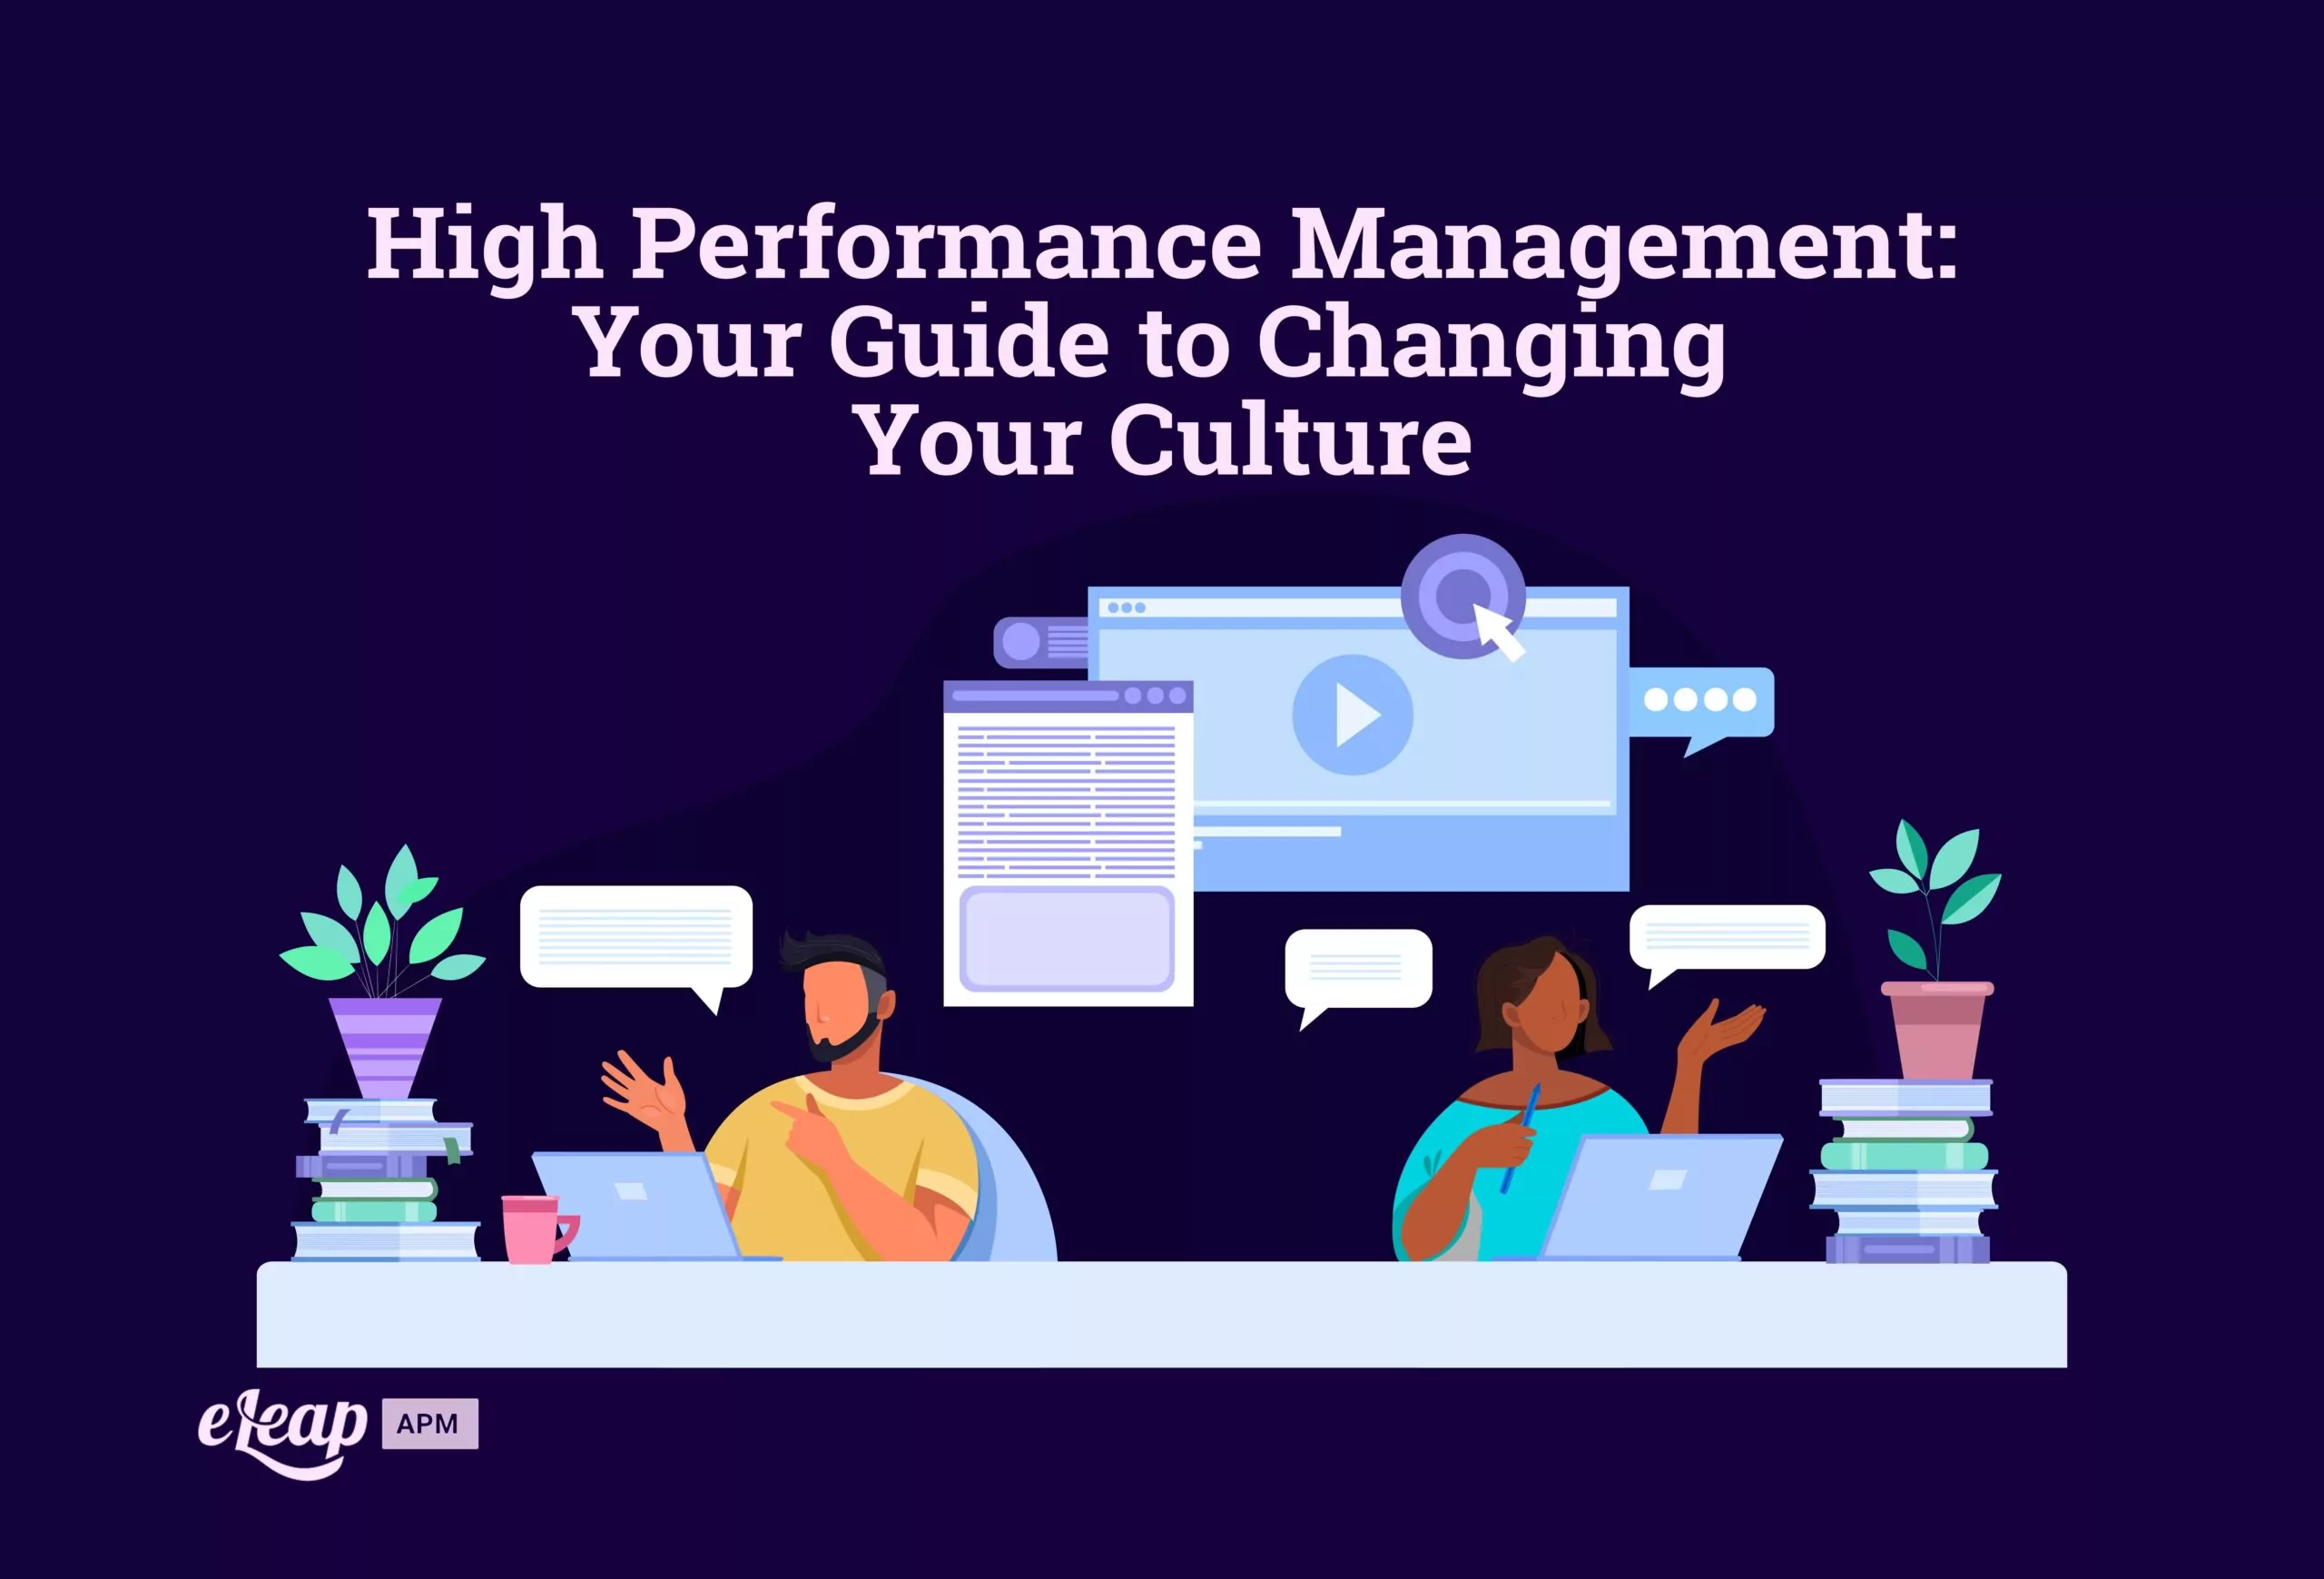 High Performance Management: Your Guide to Changing Your Culture